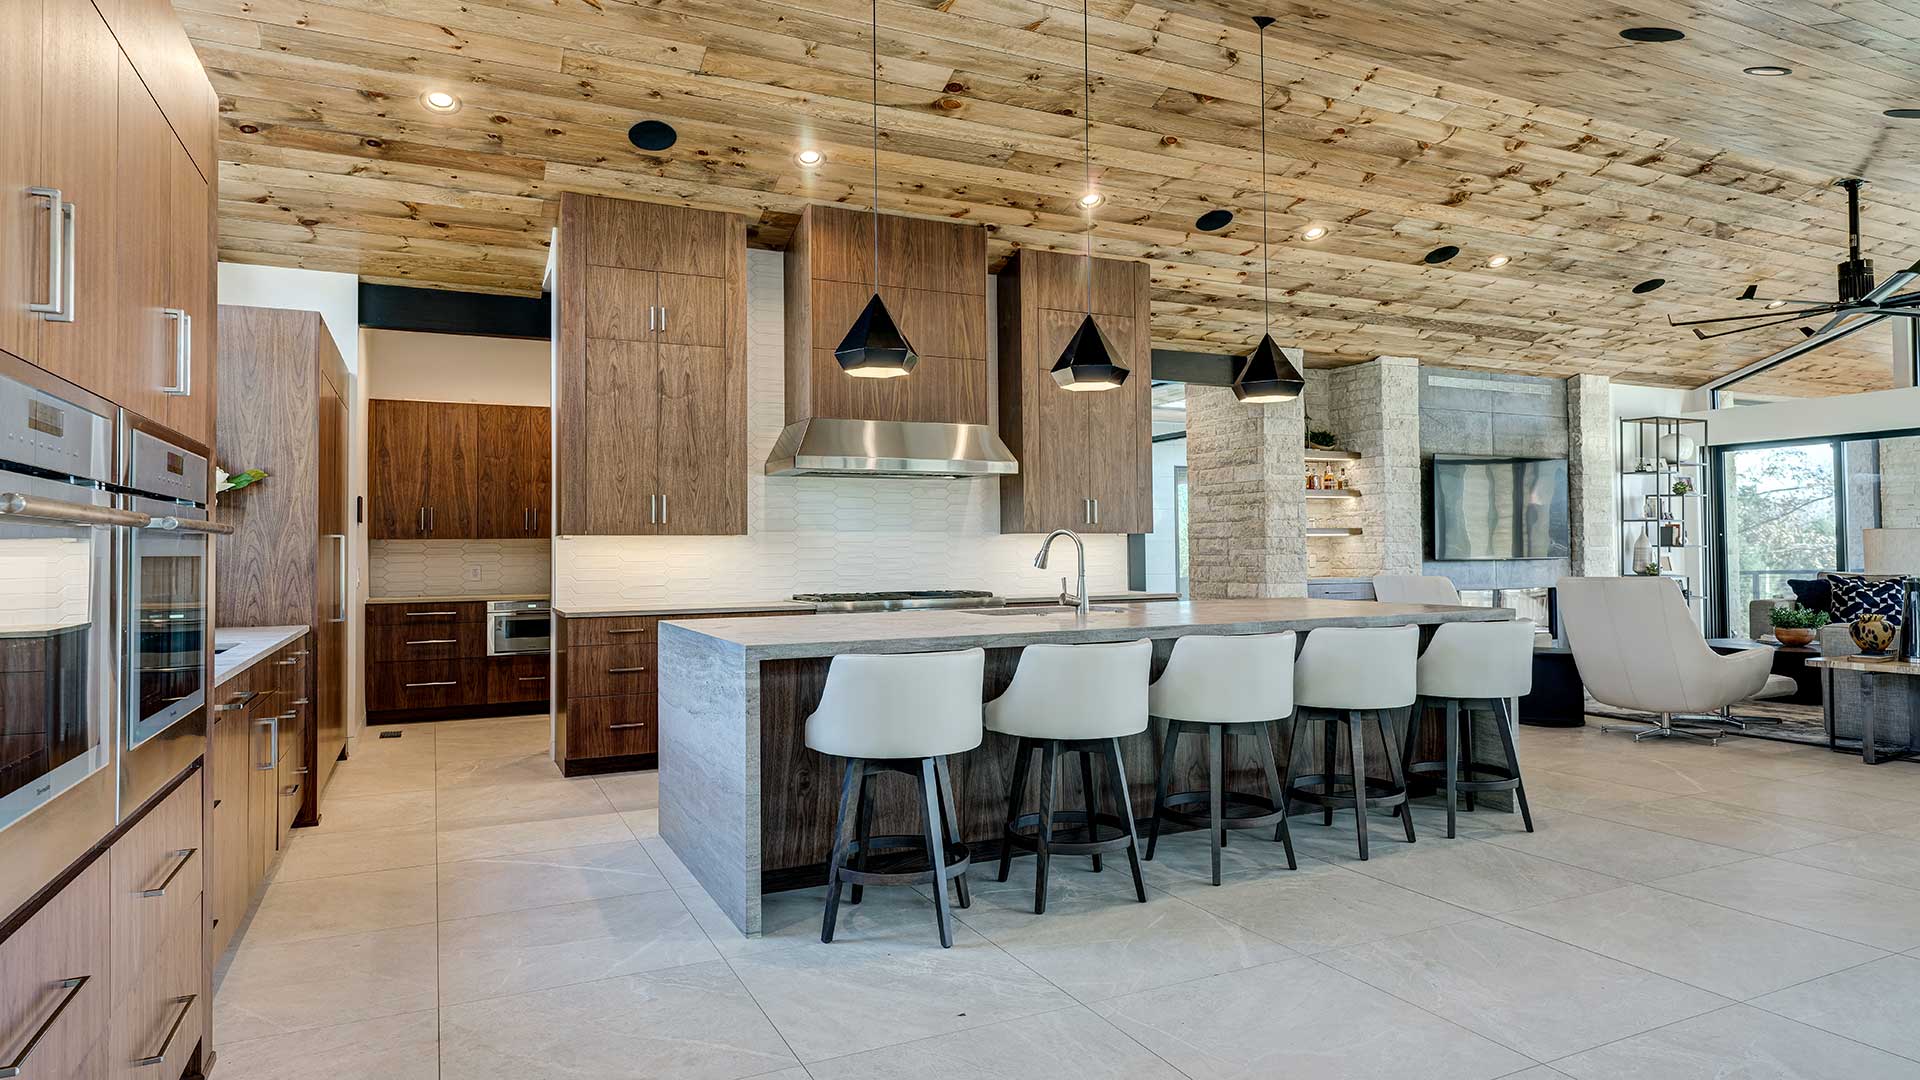 Modern Kitchen design with custom cabinetry and island seating